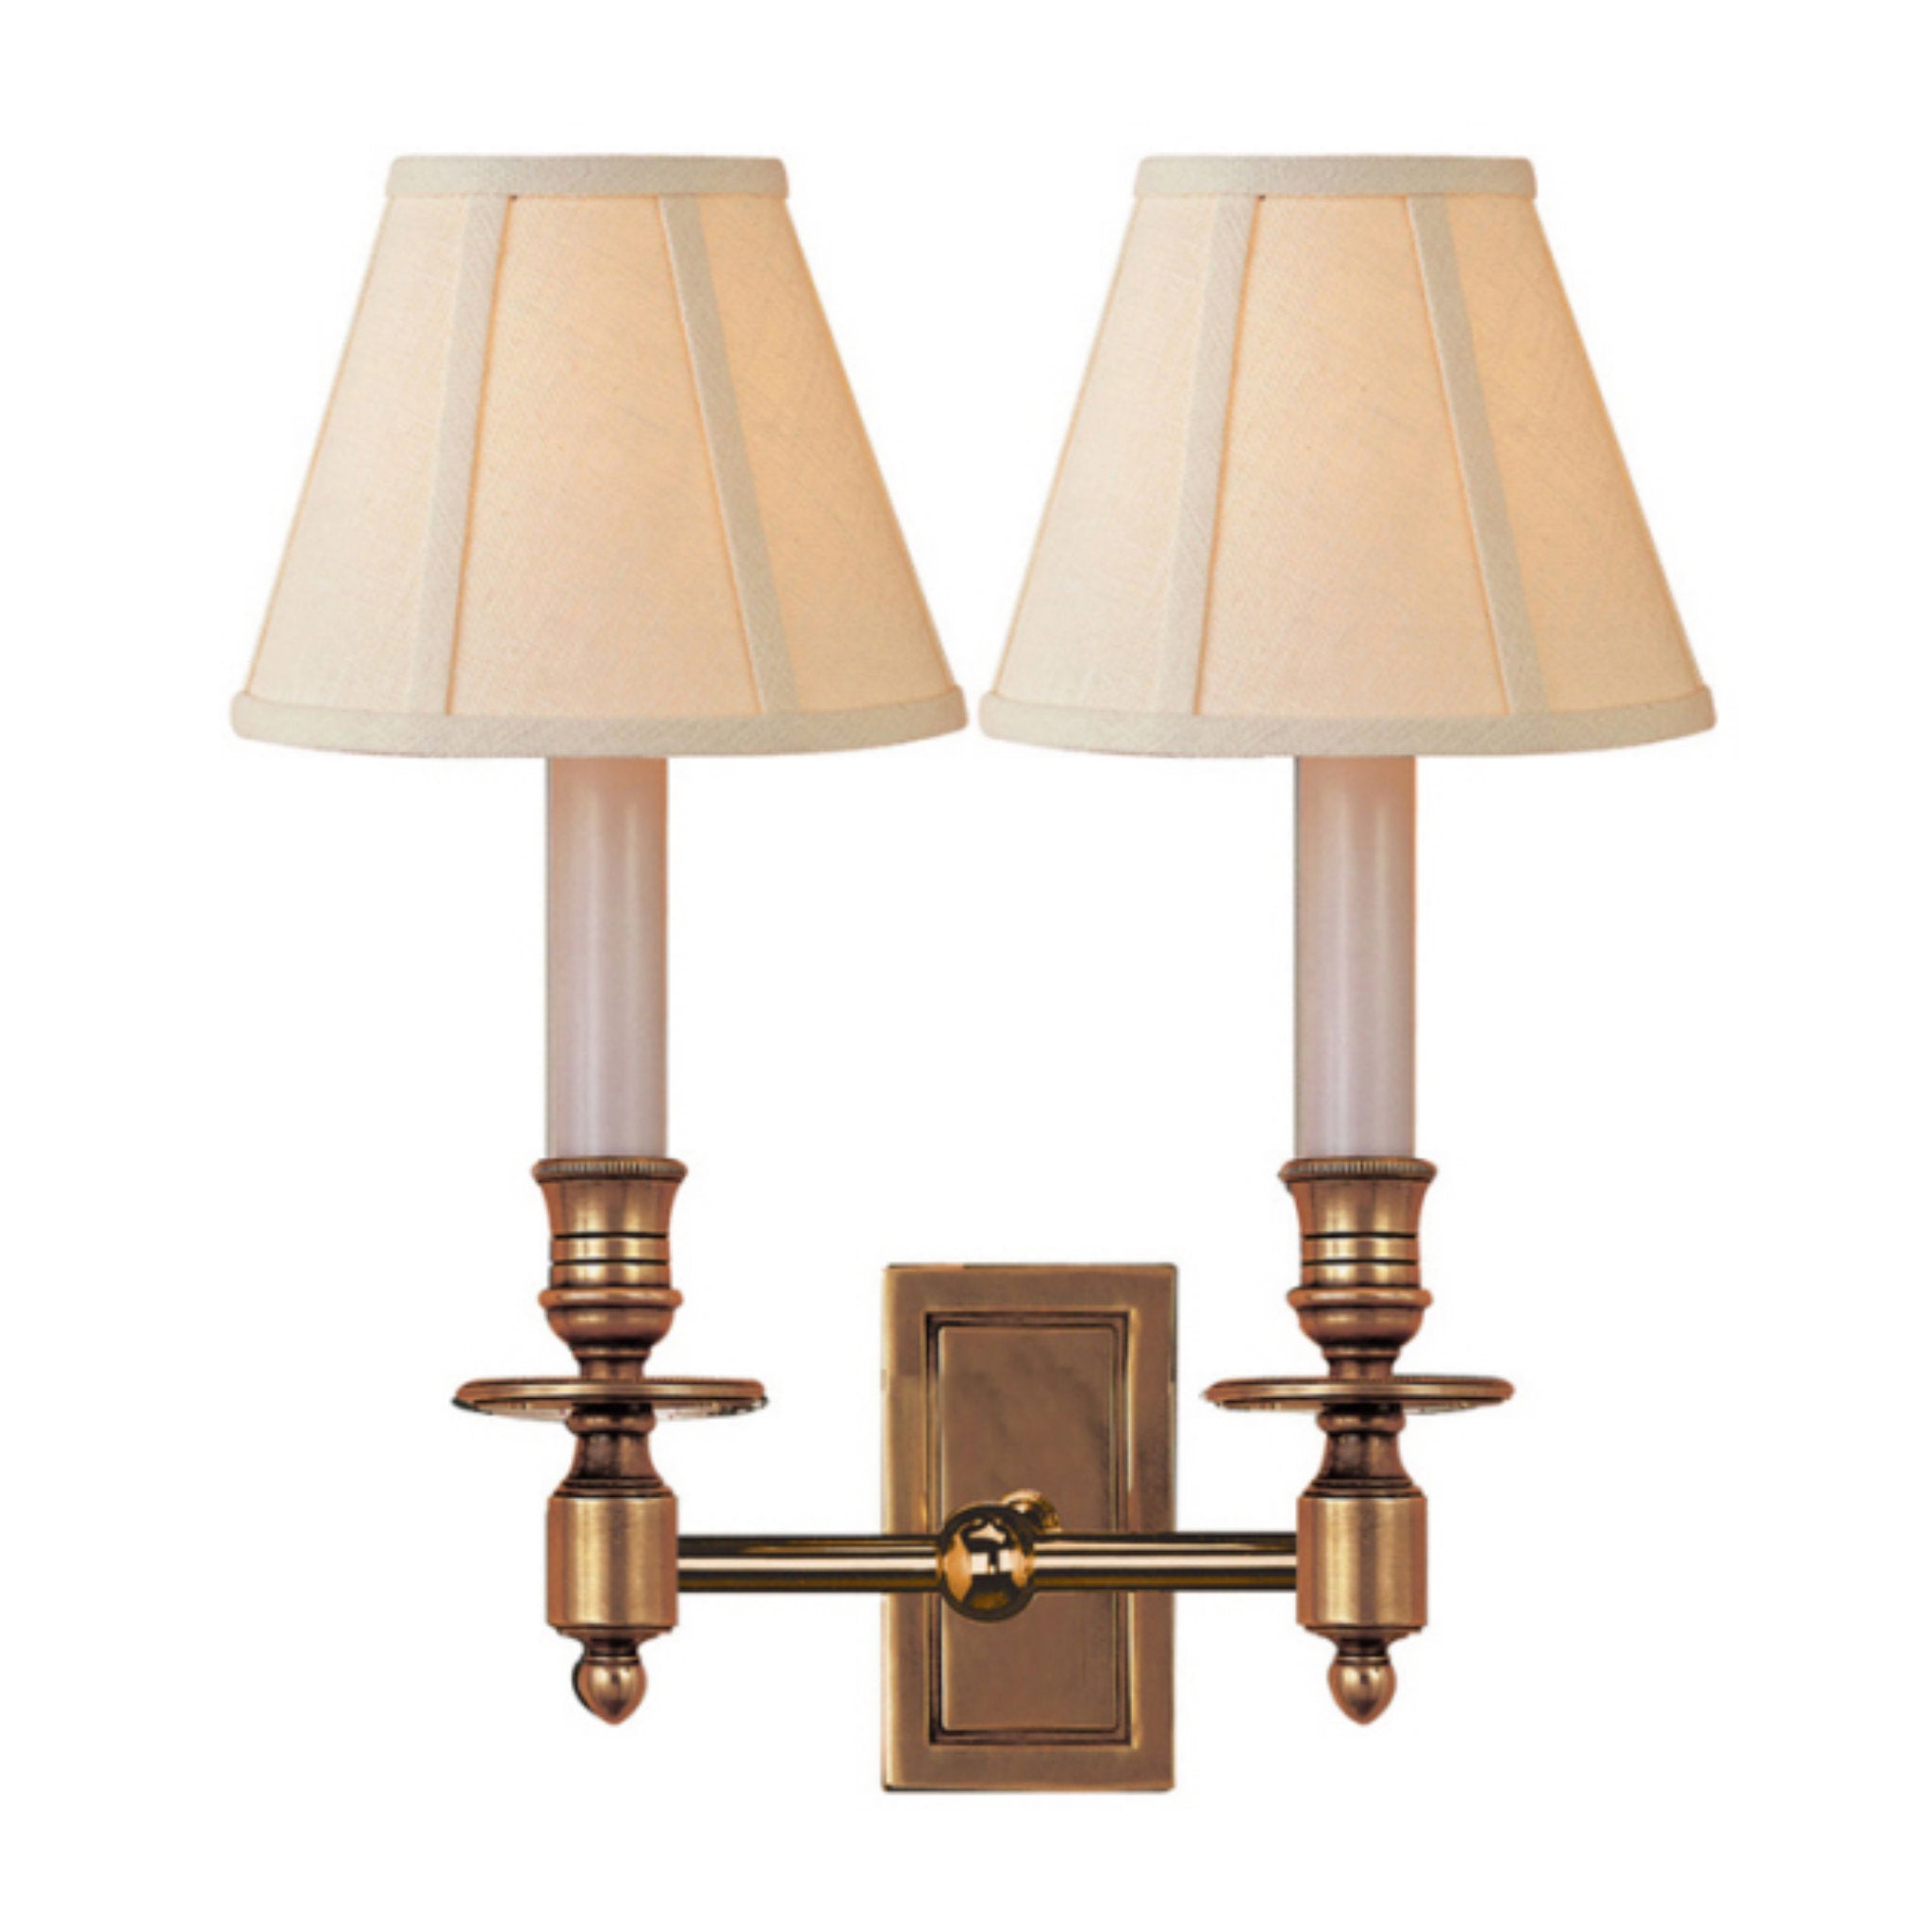 Visual Comfort French Double Library Sconce in Hand-Rubbed Antique Brass with Linen Shades